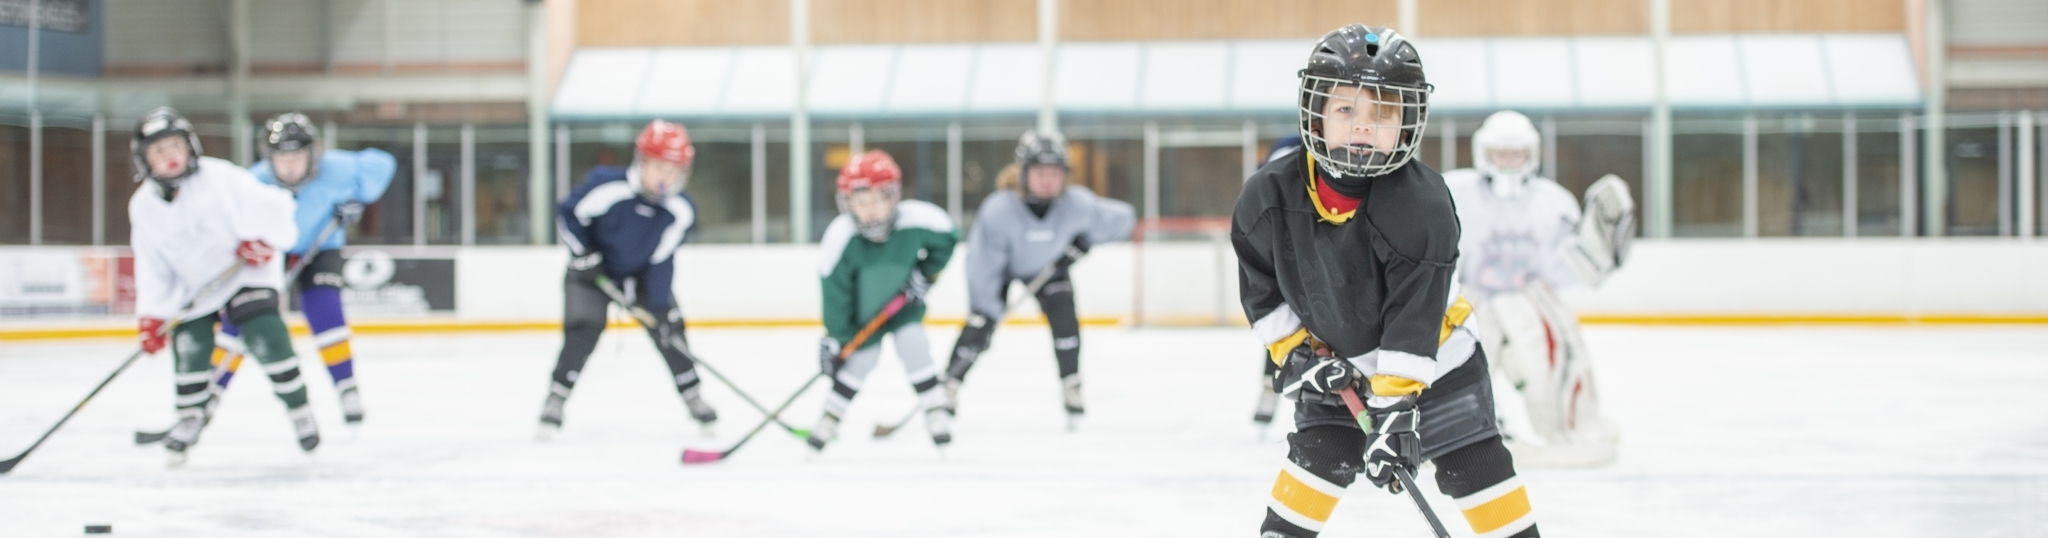 Rec Centres Steps to Success Kids Playing Hockey